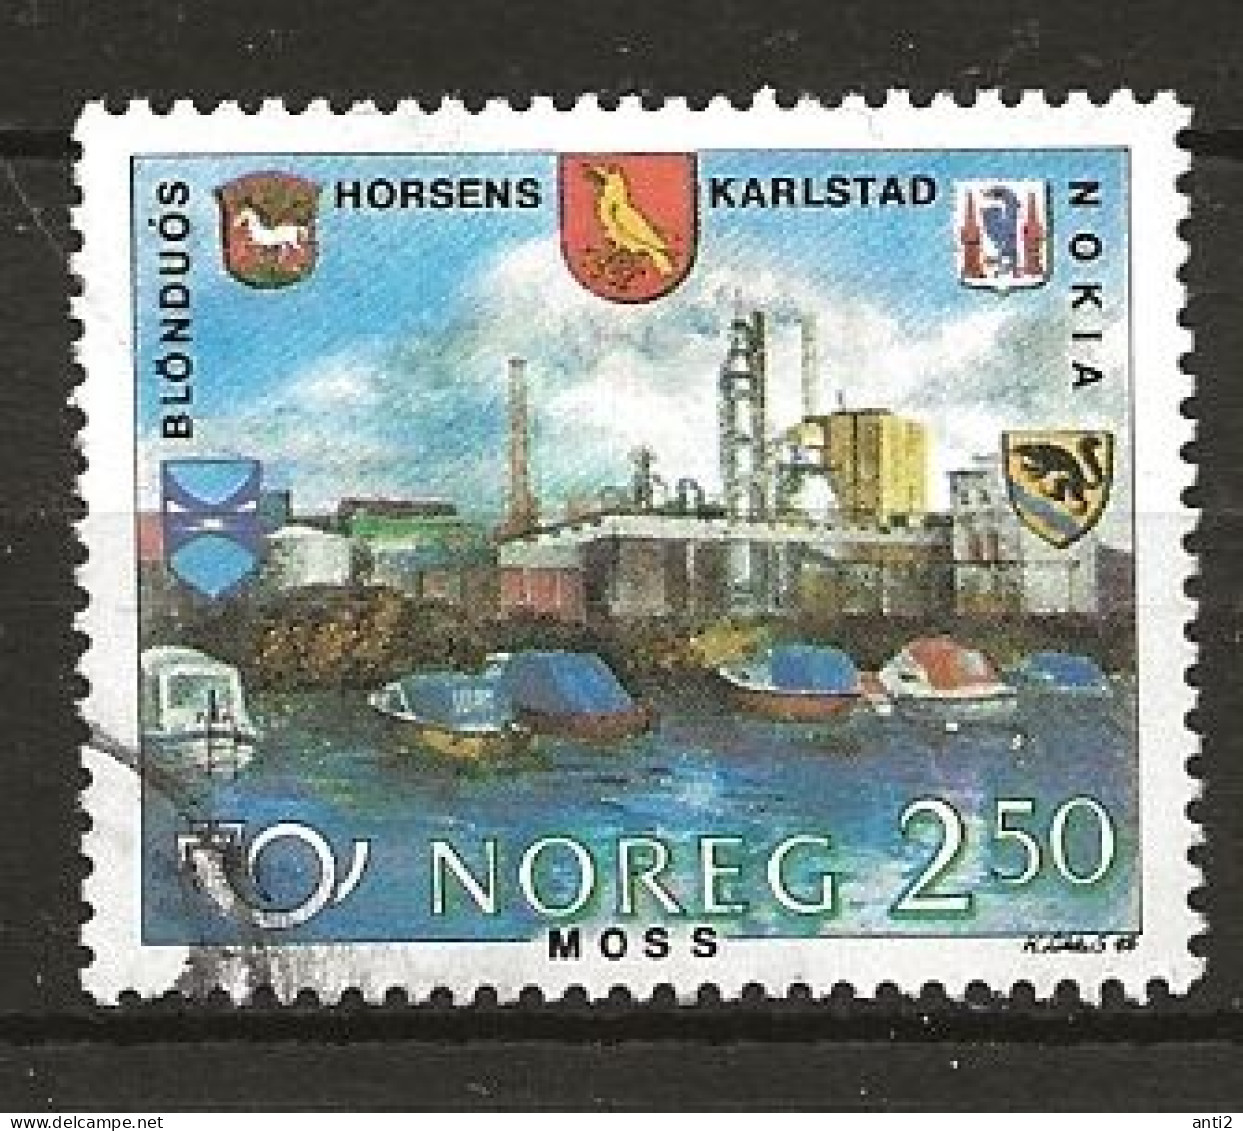 Norway 1986 NORTH: Twin Cities In Scandinavia, Moss, Blonduos, Horsens, Karlstad, Nokia, Mi 948, Cancelled(o) - Oblitérés